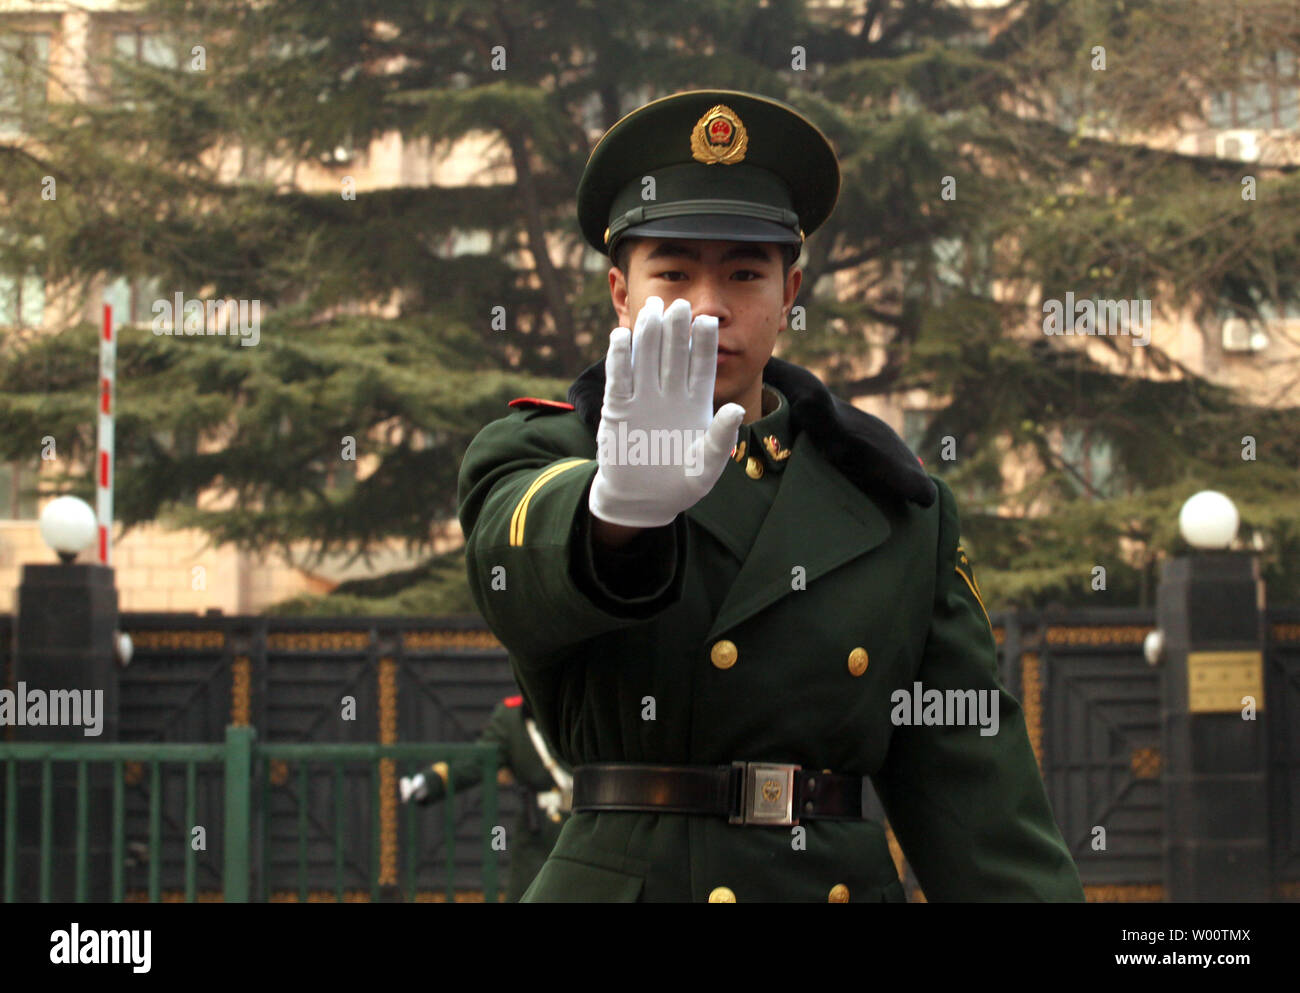 Chinese soldiers guard the North Korean embassy as a diplomat leaves the compound in Beijing November 29, 2010.  China remains Pyongyang's biggest trade partner and arguably has the most leverage on Kim Jon-Il's regime. North Korea placed surface-t-surface missiles on launch pads in the Yellow Sea, South Korea's state press said, as the United States and South Korea began military drills and China called for emergency talks.     UPI/Stephen Shaver Stock Photo